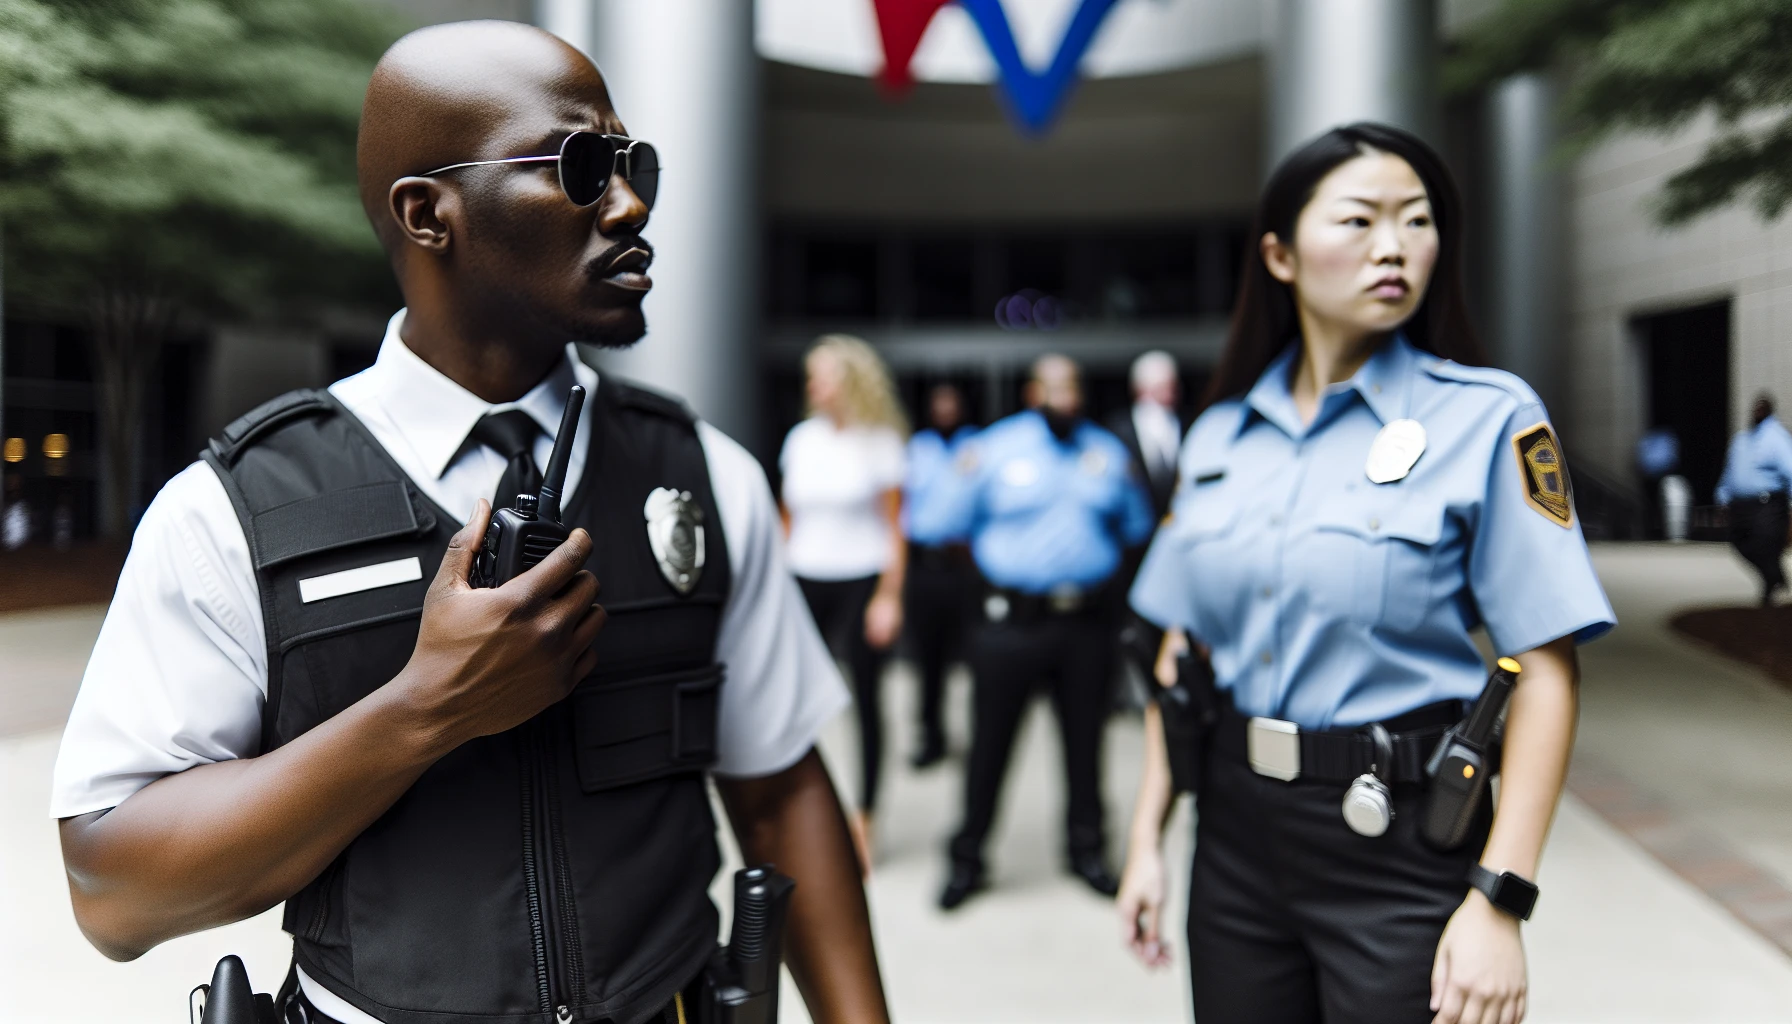 Armed and unarmed security guards providing protection in Atlanta, GA